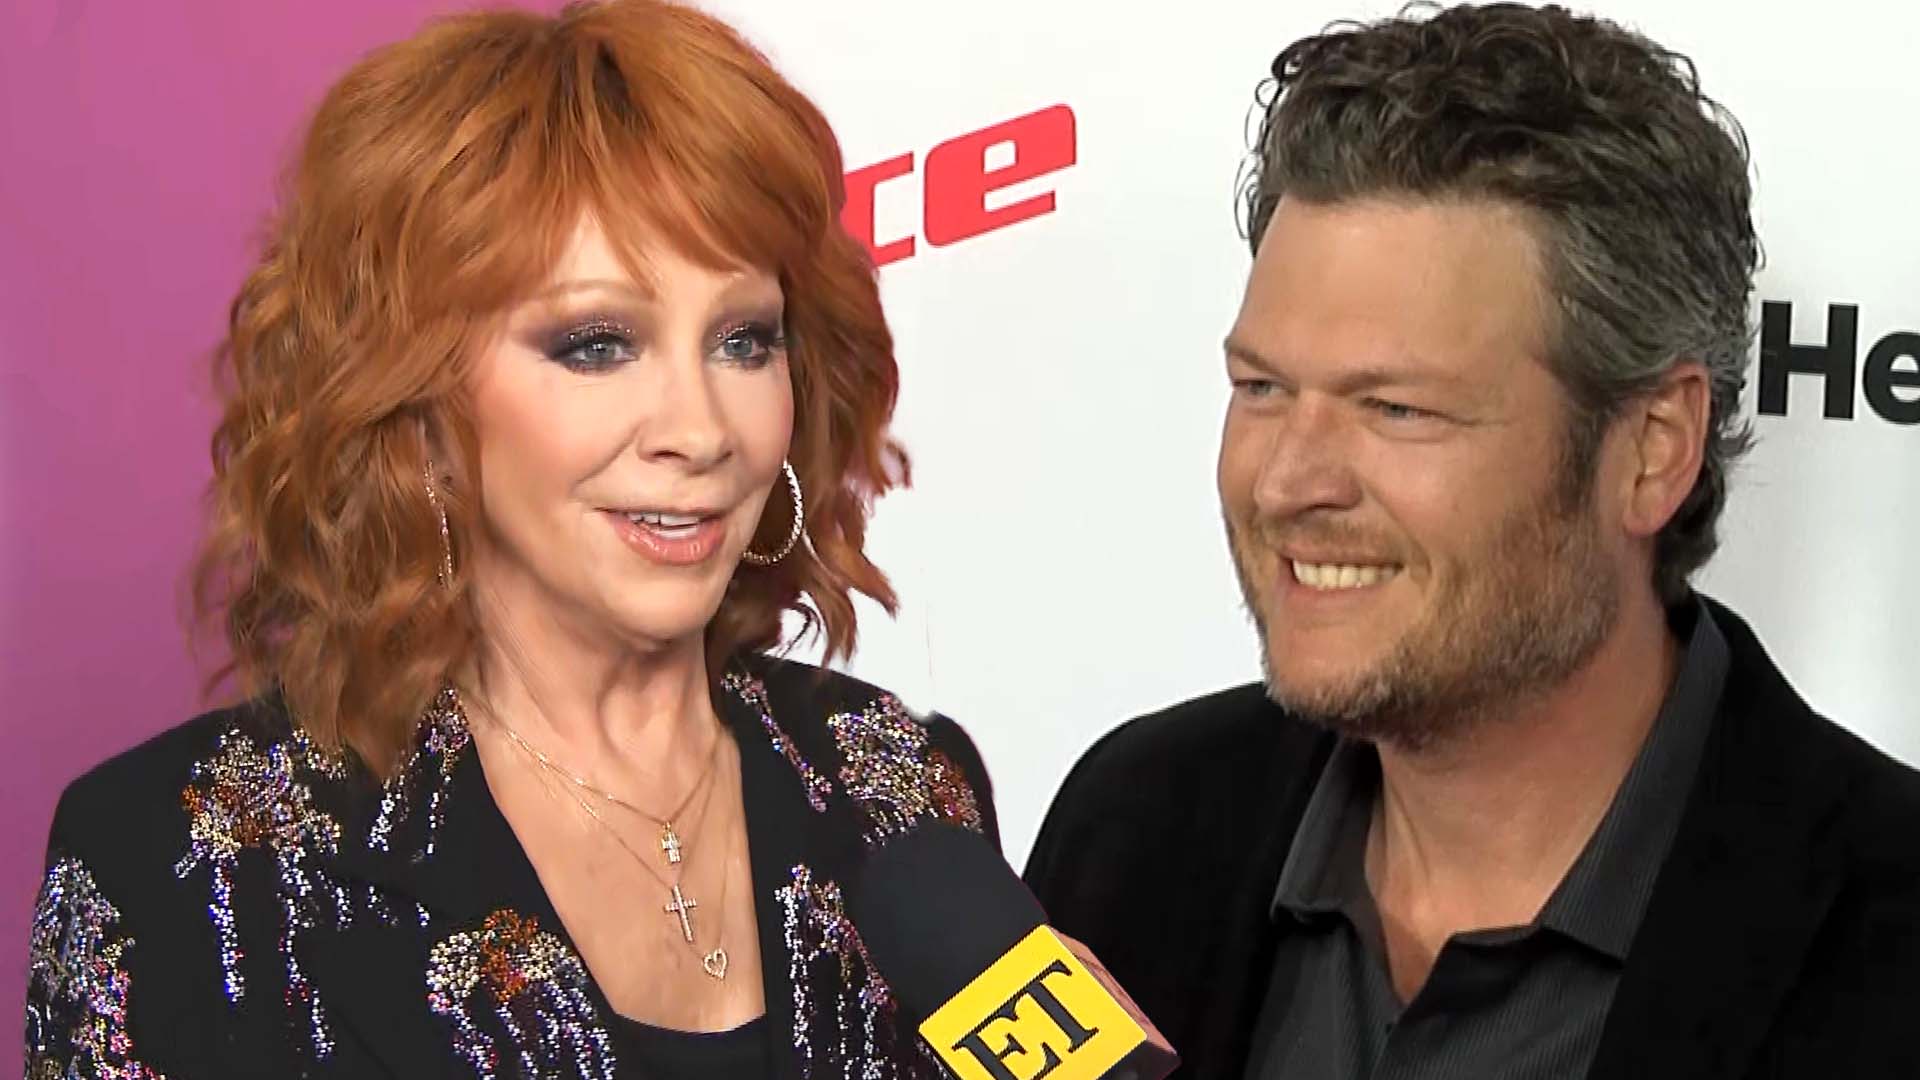 Watch Reba McEntire React to Idea of Blake Shelton Making 'Happy’s Place' Cameo 